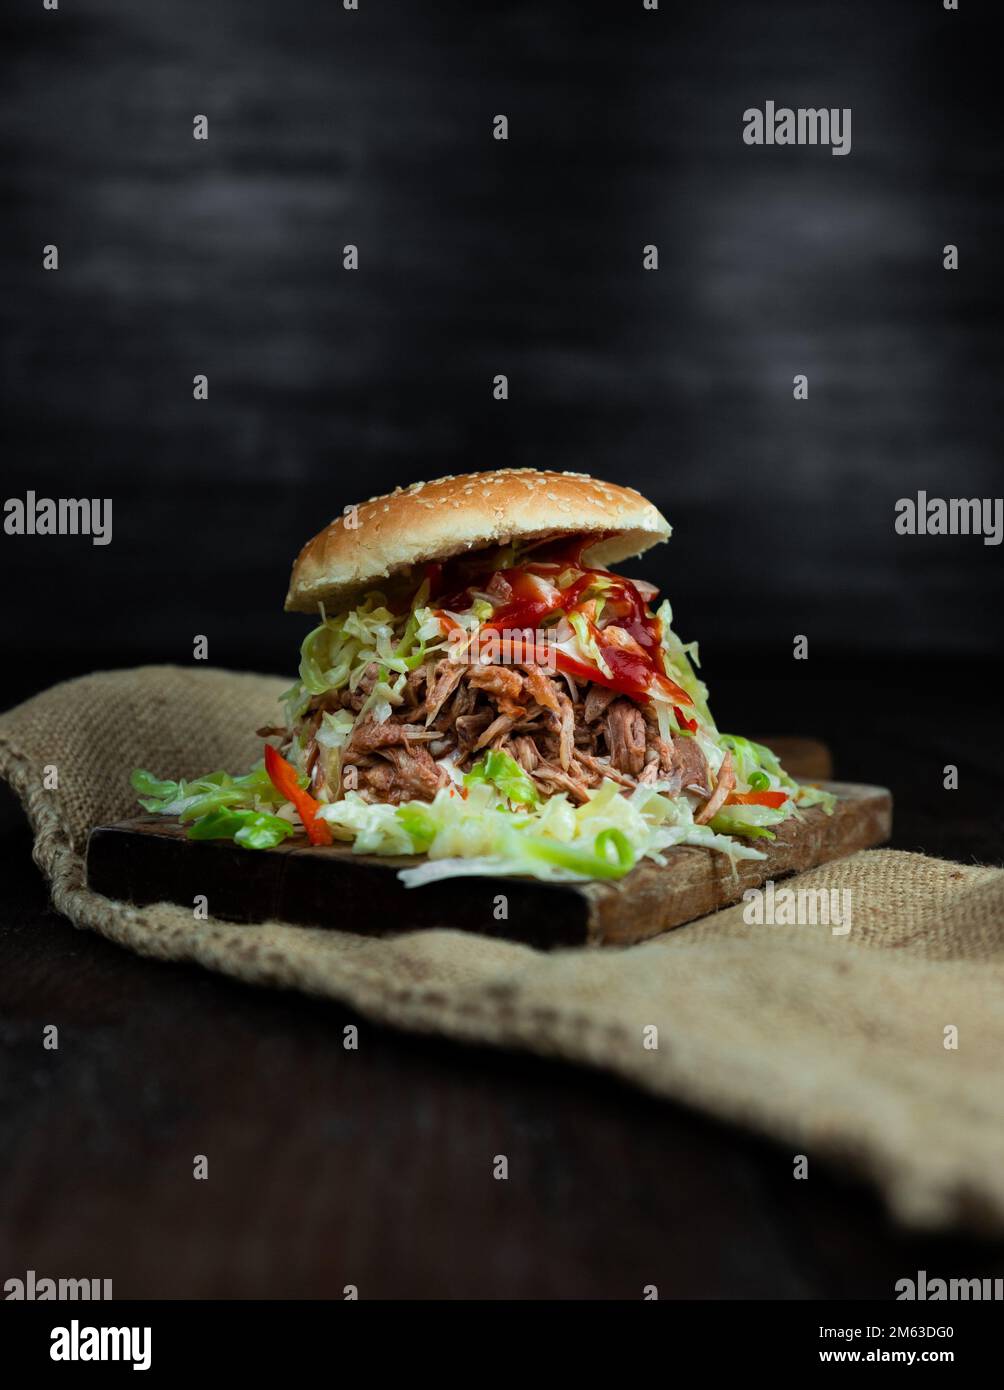 Pulled pork sandwich with coleslaw, buns and seasoning. Pulled pork burgers. Stock Photo